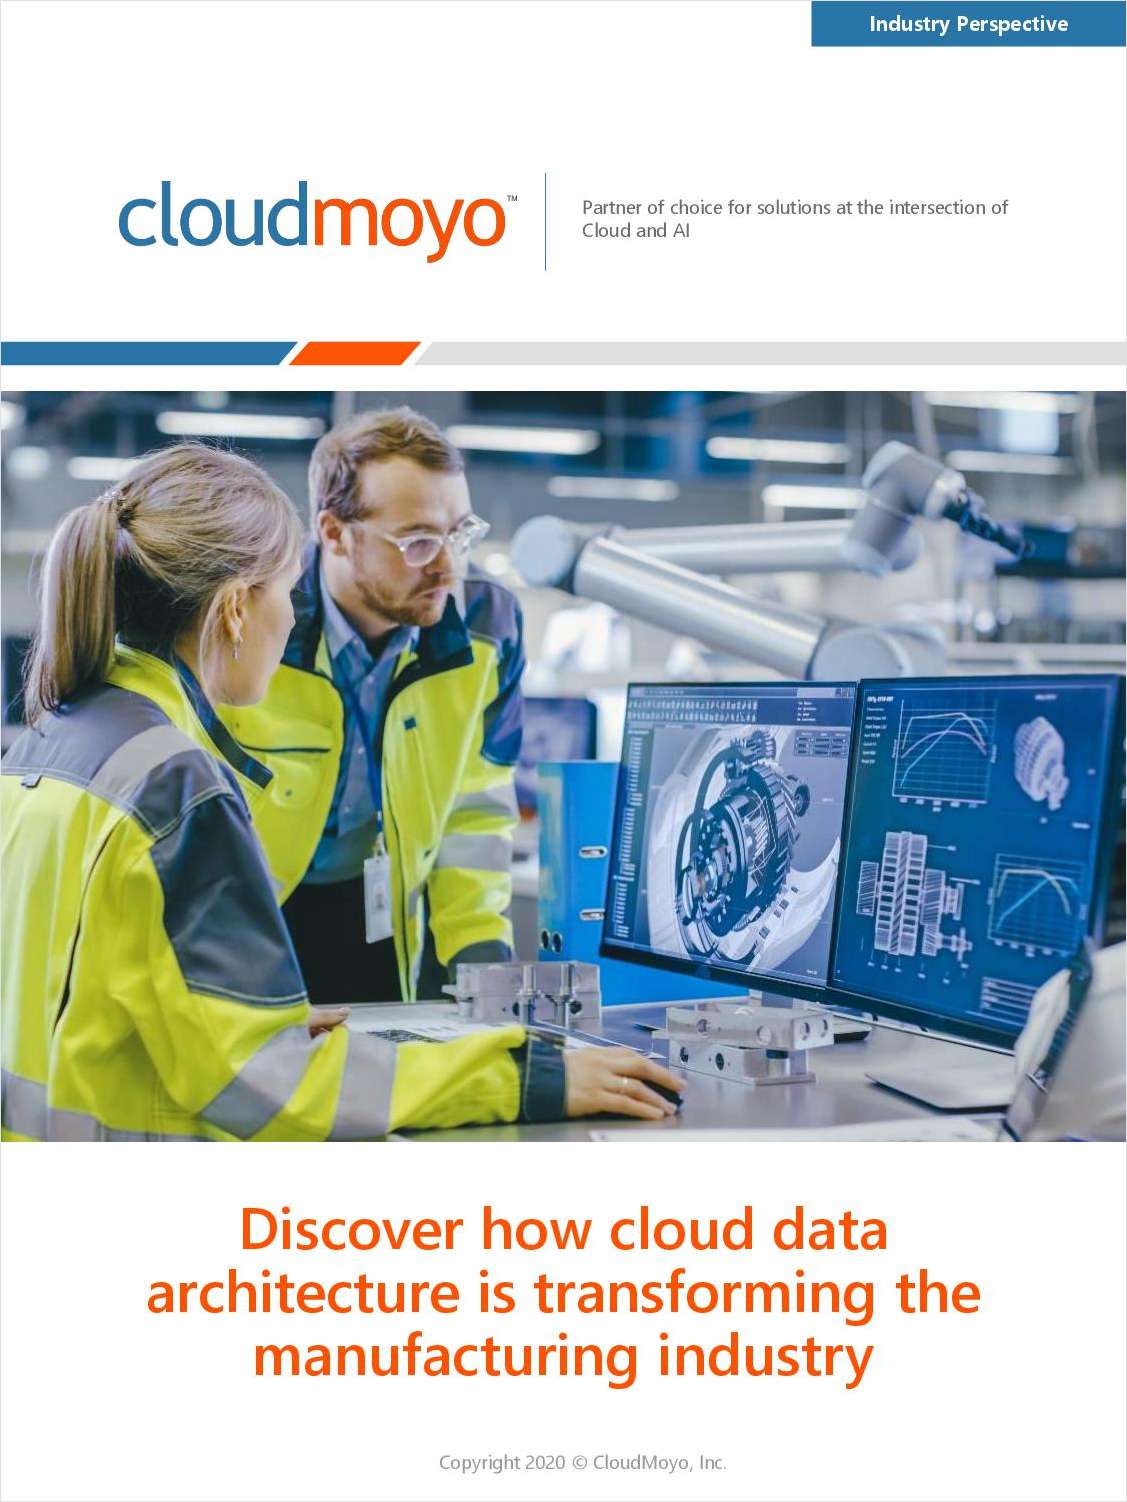 Discover How Cloud Data Architecture Is Transforming the Manufacturing Industry